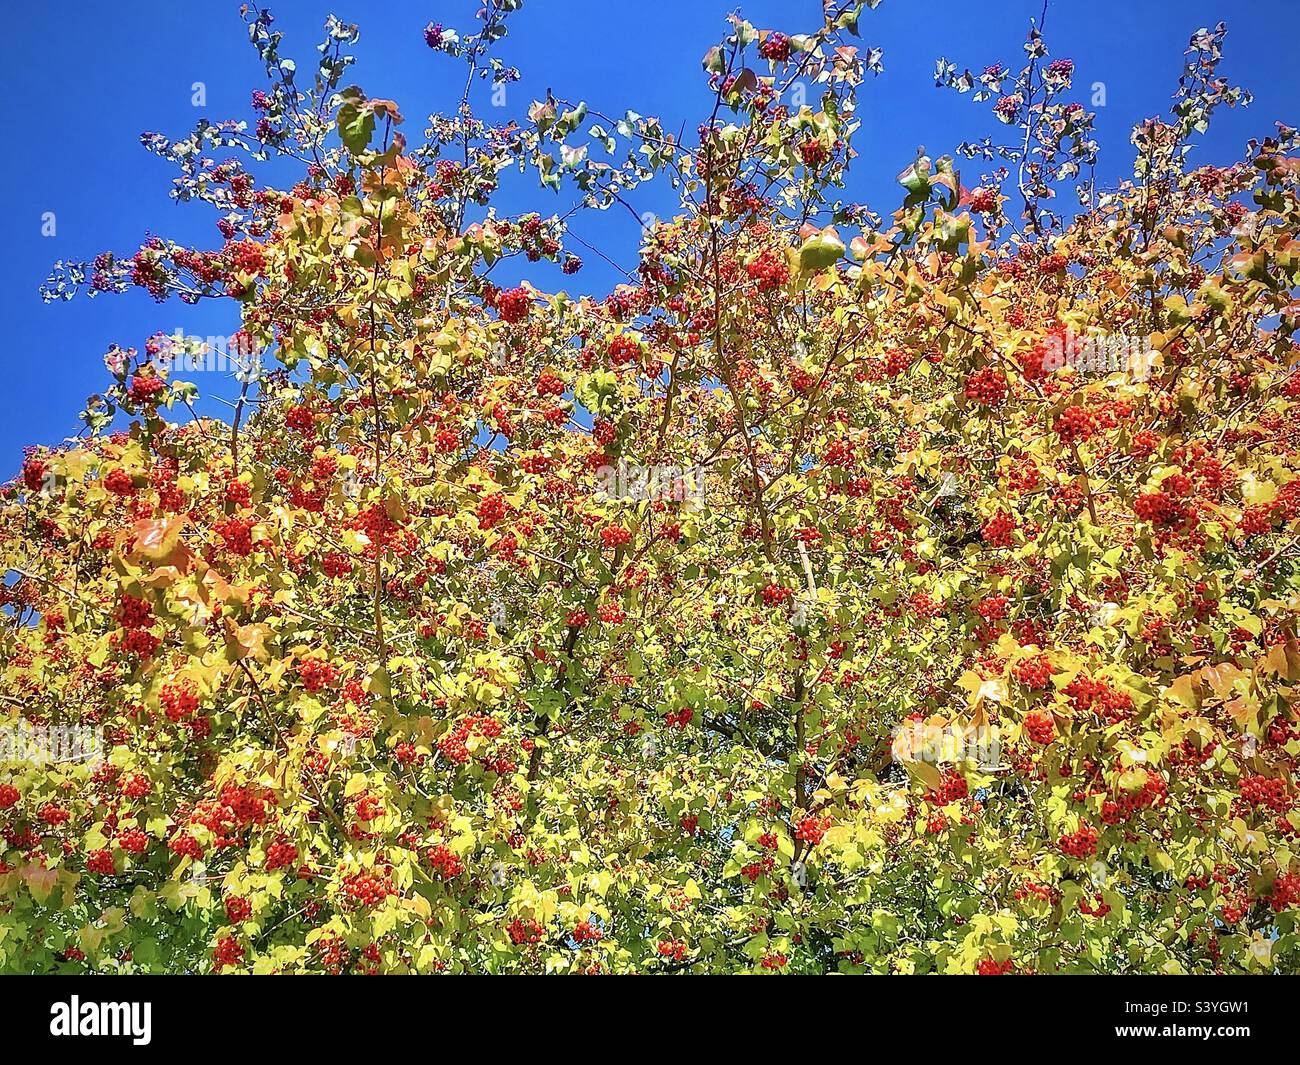 A Cockspur Hawthorn tree on grounds of a church in the Salt Lake valley in Utah, USA. In autumn the leaves are starting to change, but it’s the numerous clumps of red berries that really stand out. Stock Photo